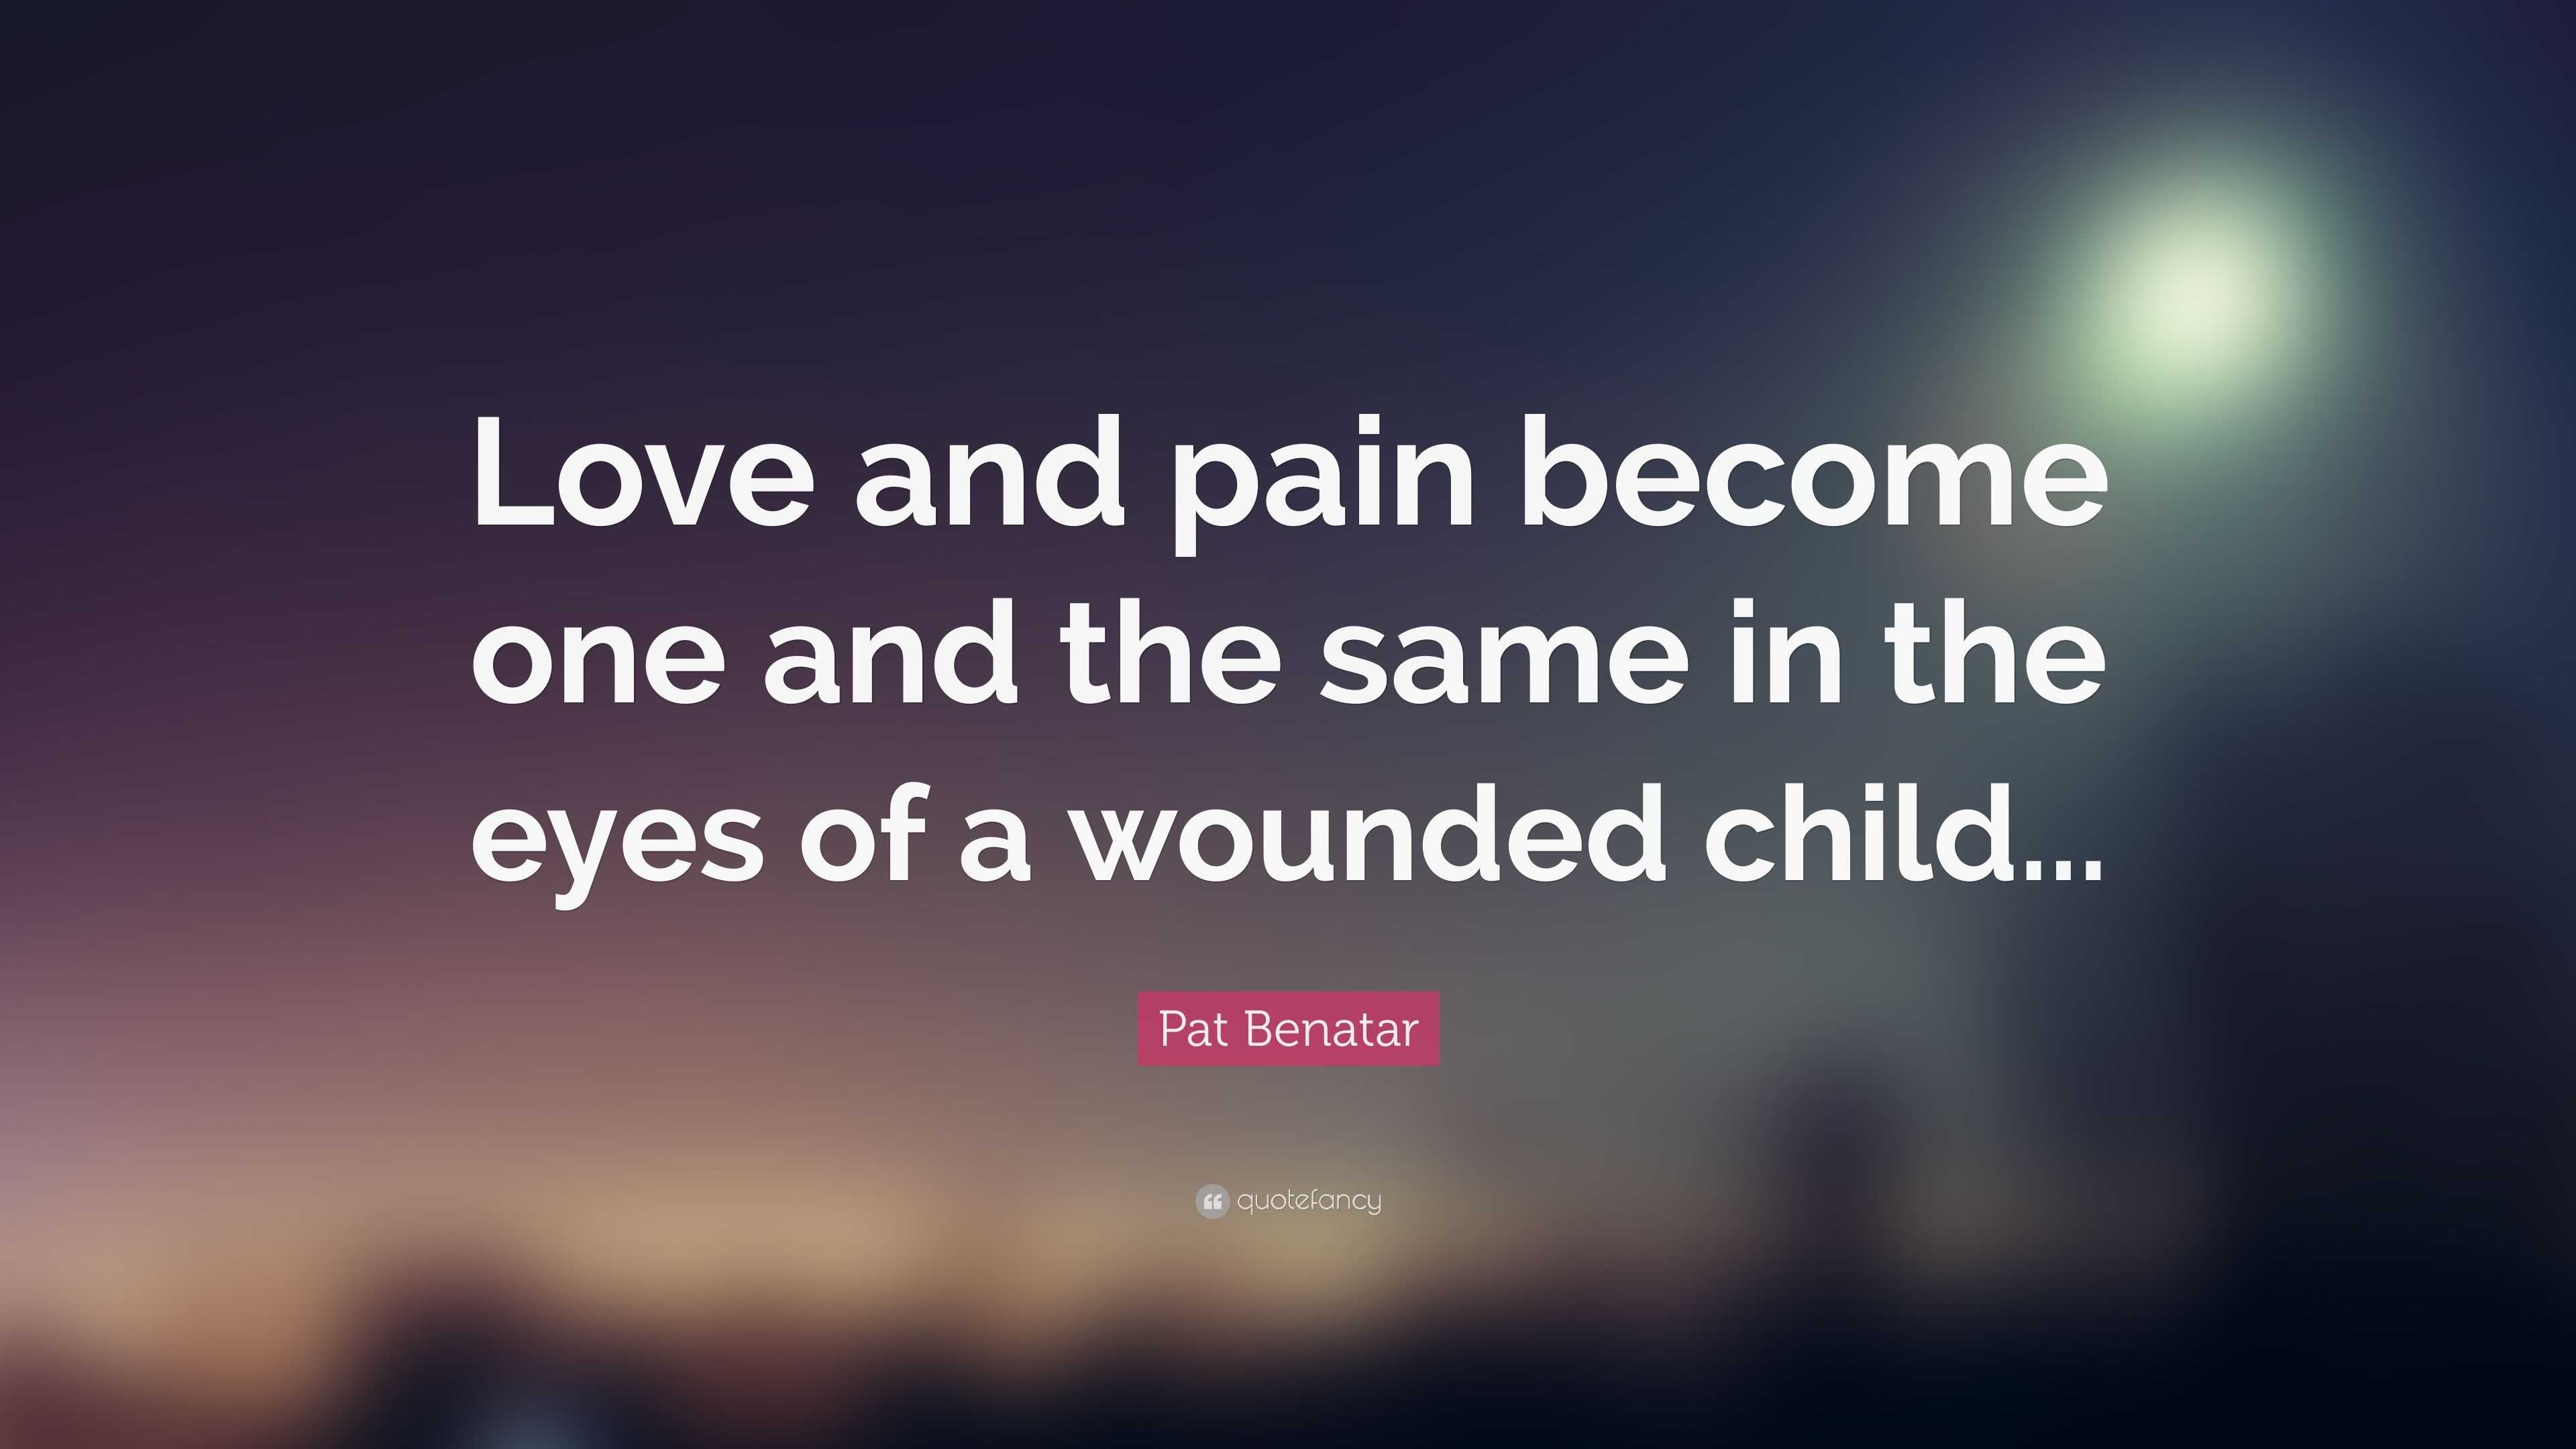 quotes about love and pain famous